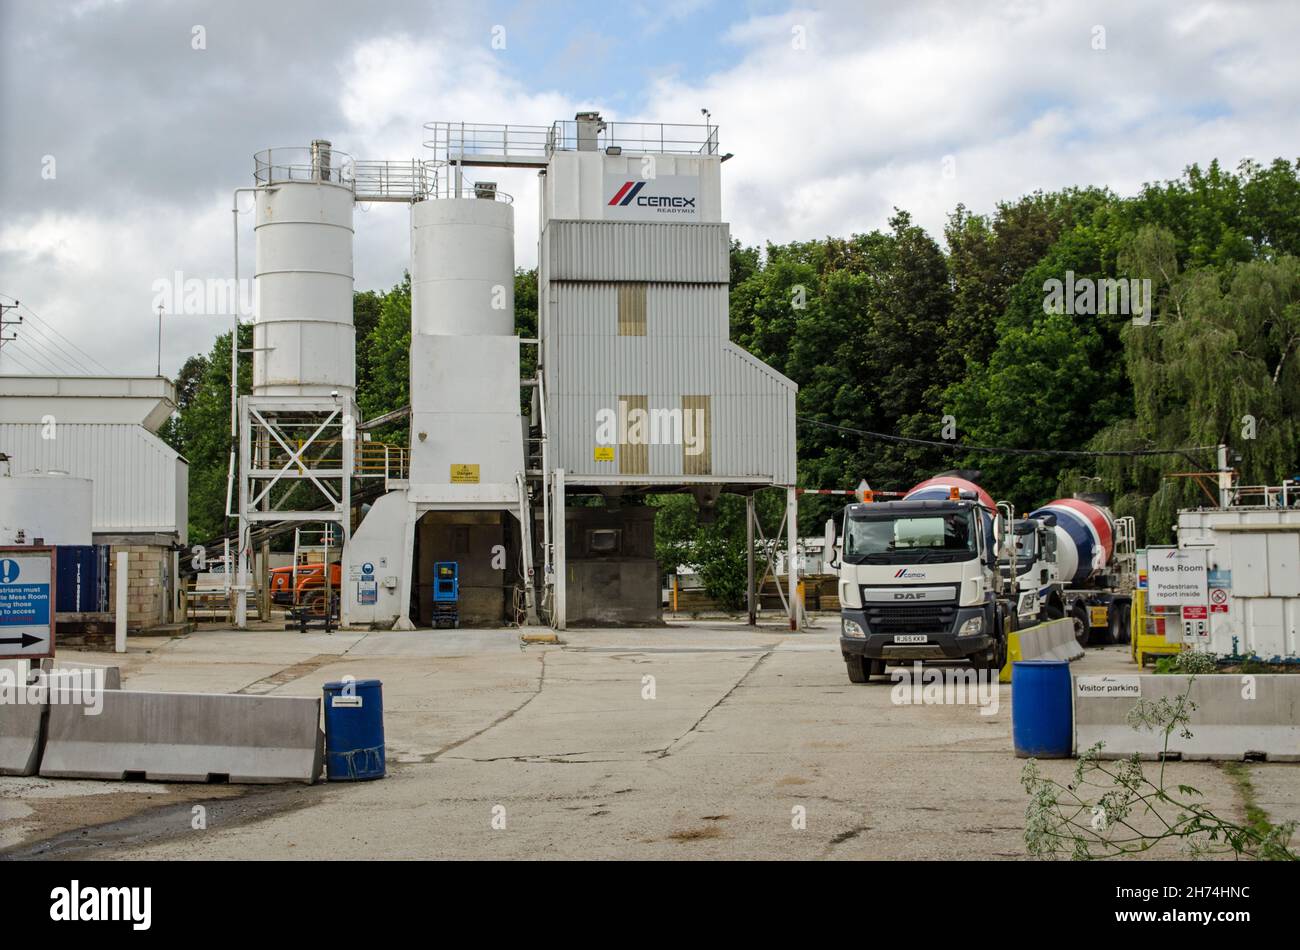 Basingstoke, UK - July 3, 2021:  View of the hoppers and lorries at the Cemex building material plant in Basingstoke, Hampshire.  The site provides ce Stock Photo